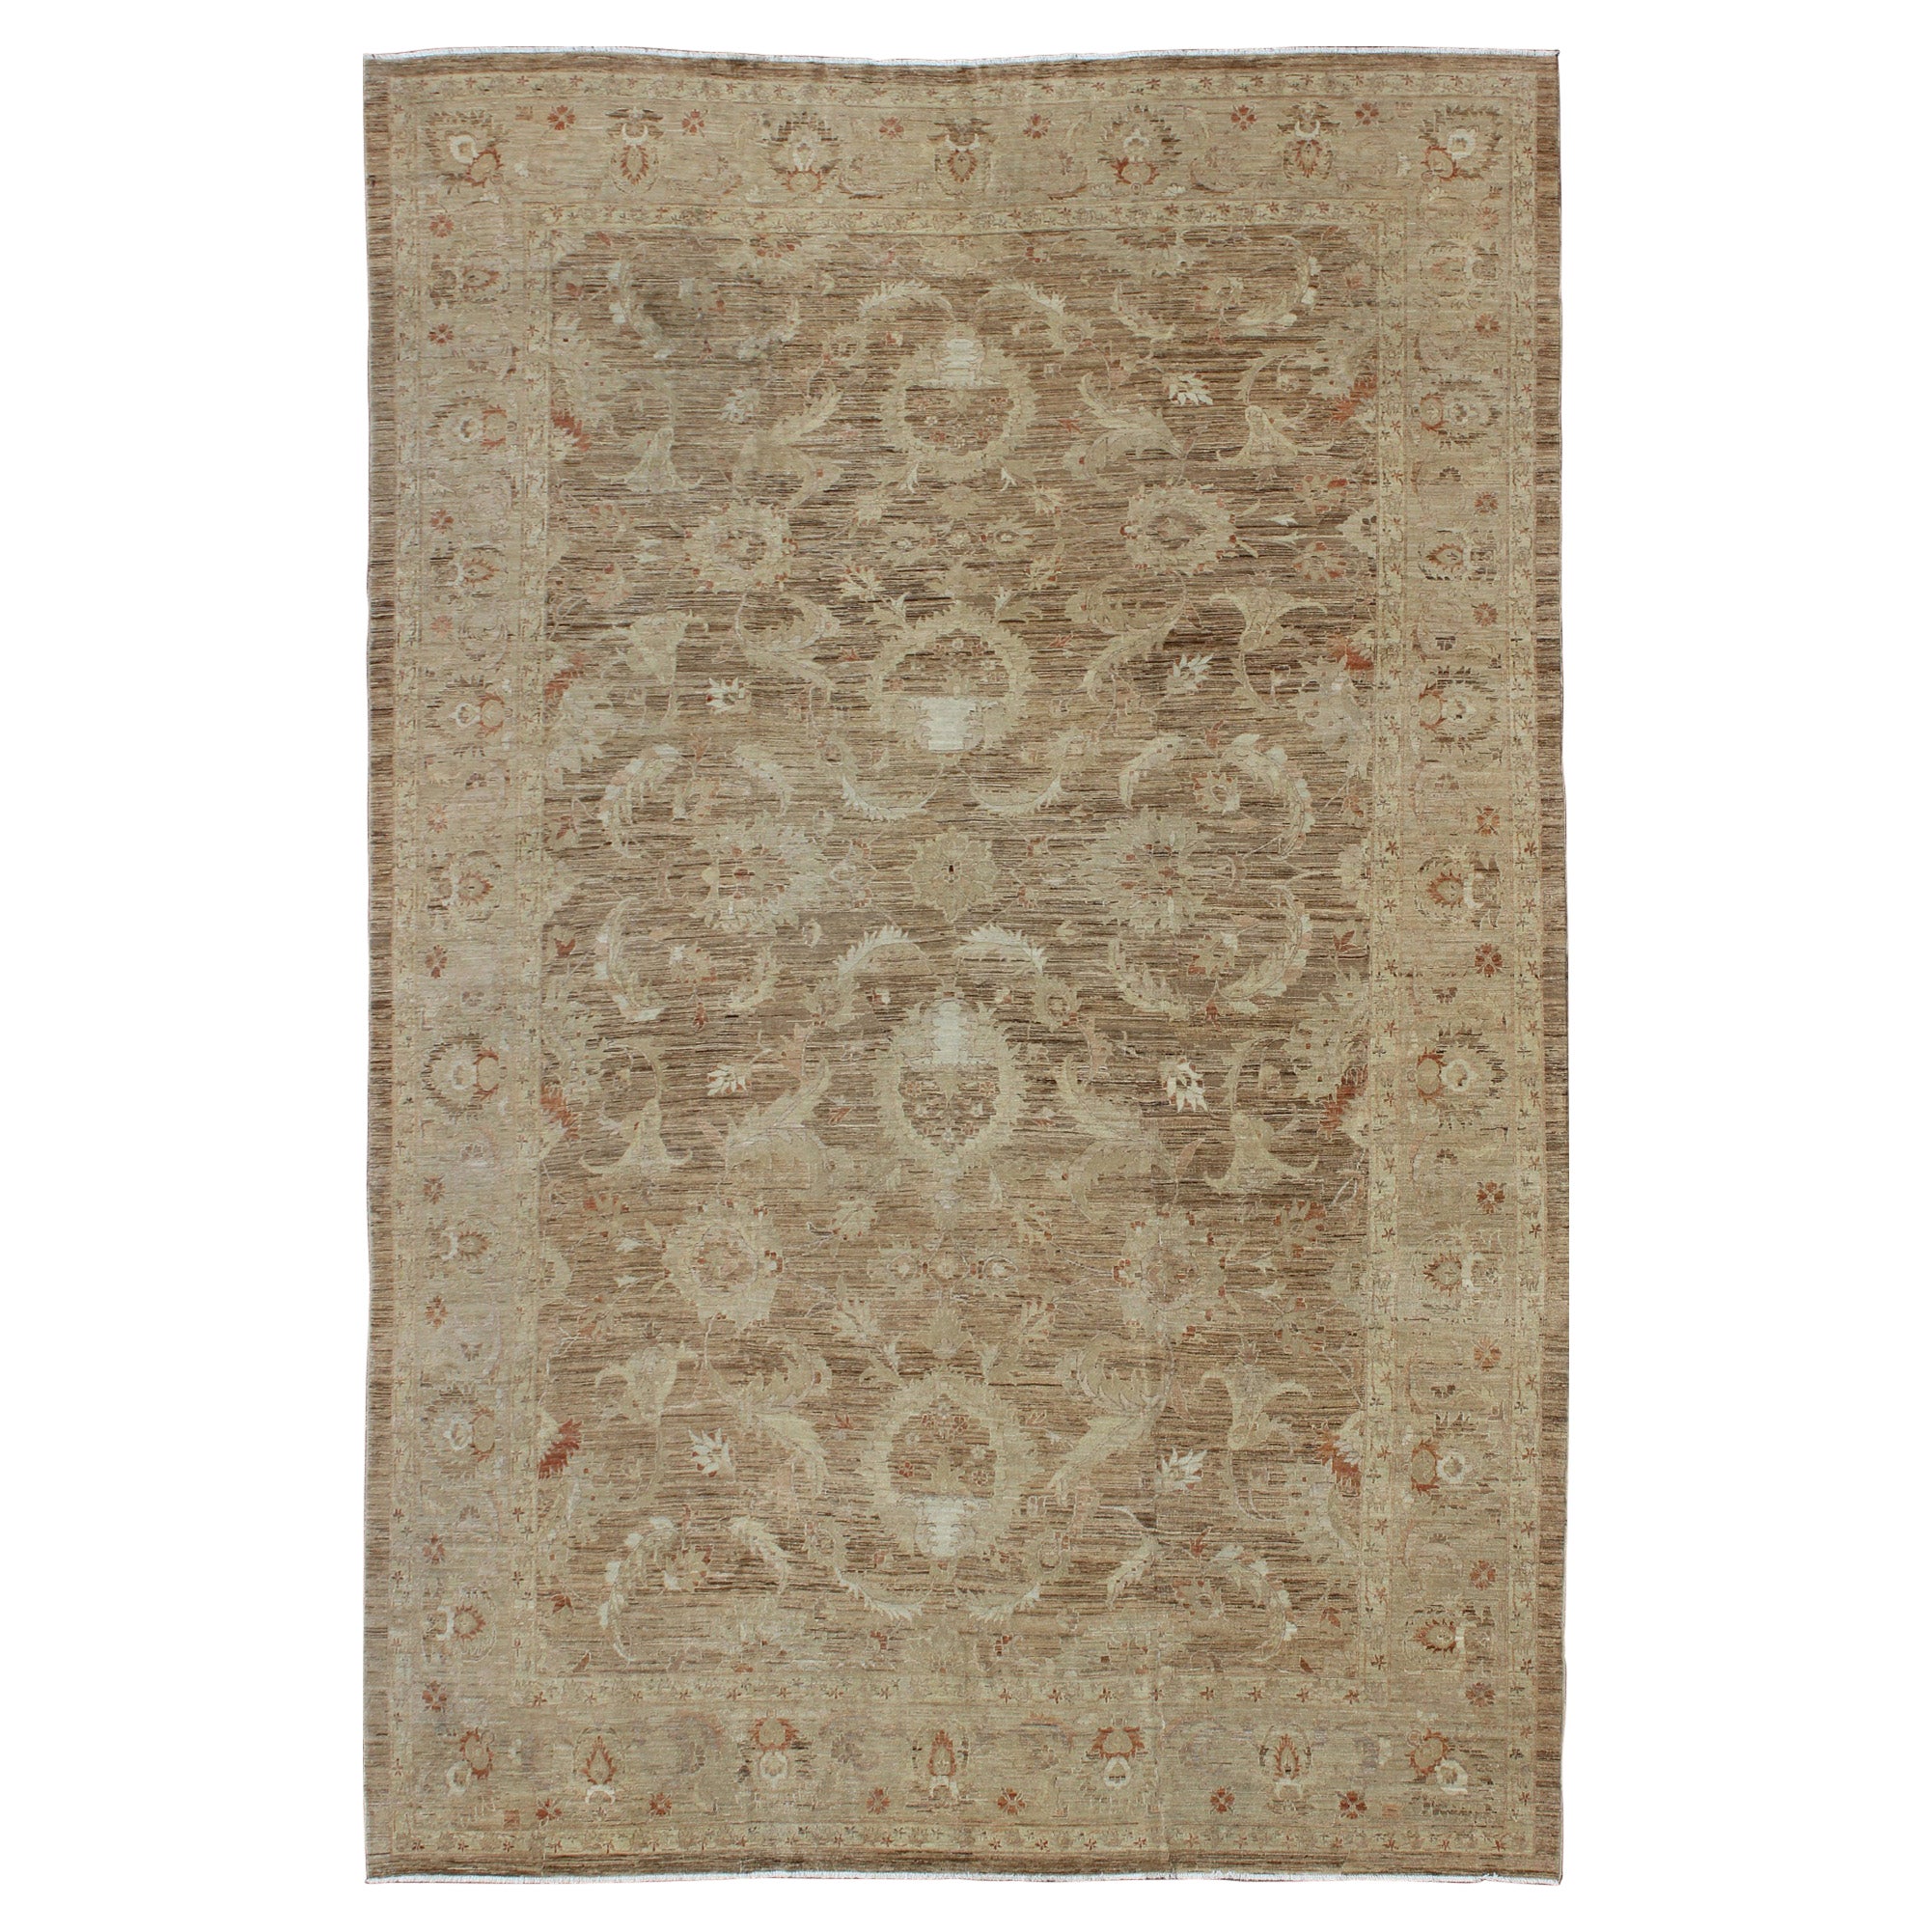 Very Large Sultanabad Pattern in Earth Tones with Light Brown Lt. Green & Taupe For Sale